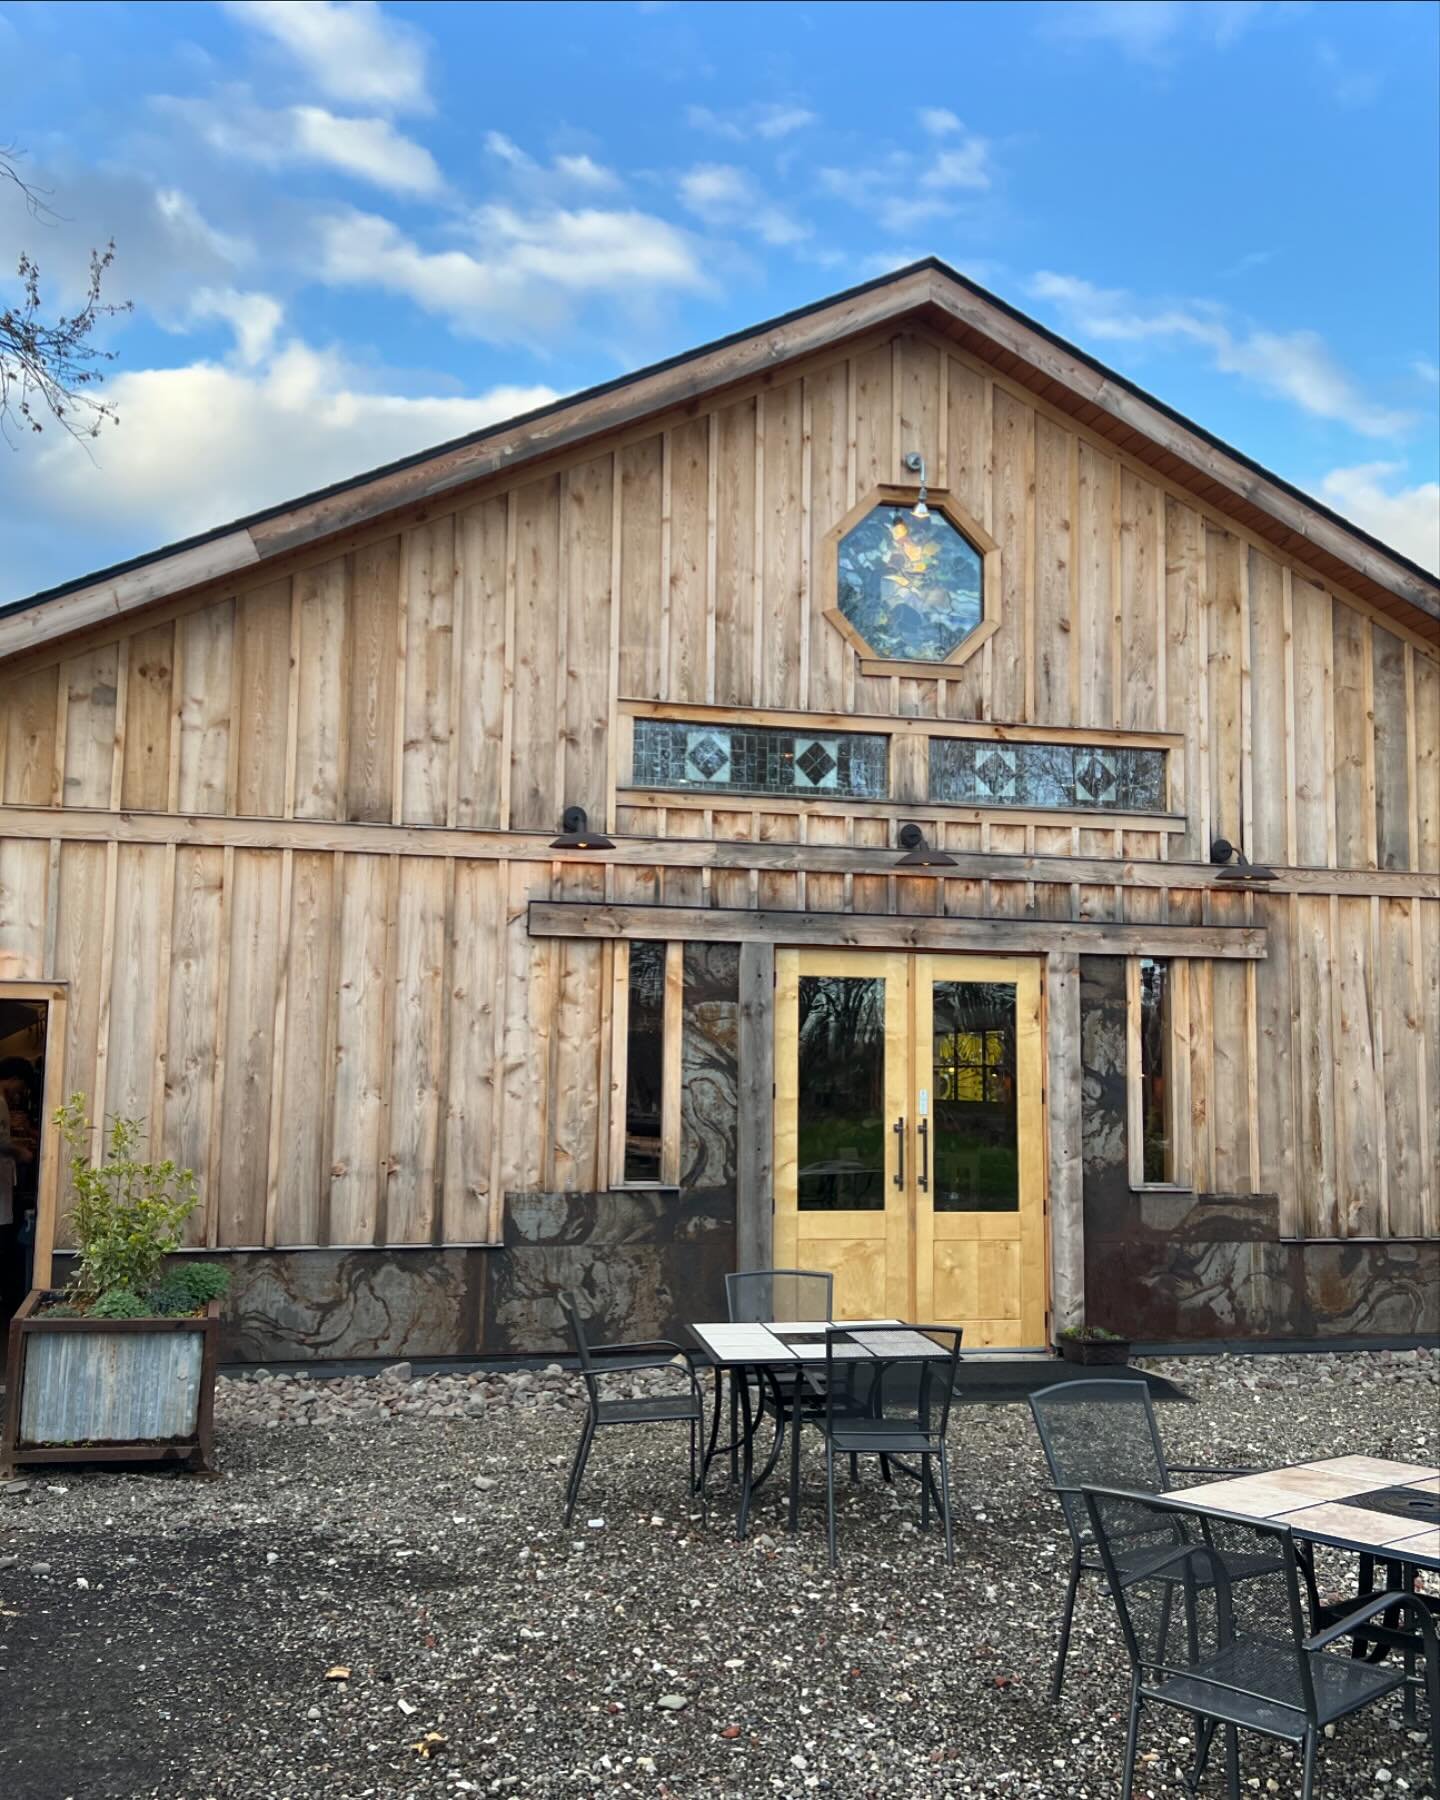 Another amazing HV BREWEY space. #greatlifebrewing #rmv_cellars just up the road from studio wingnut. All the best of what I call the Hudson valley vibe. Stone , wood, steel, remnants of our regions historical industrial background that built the nat